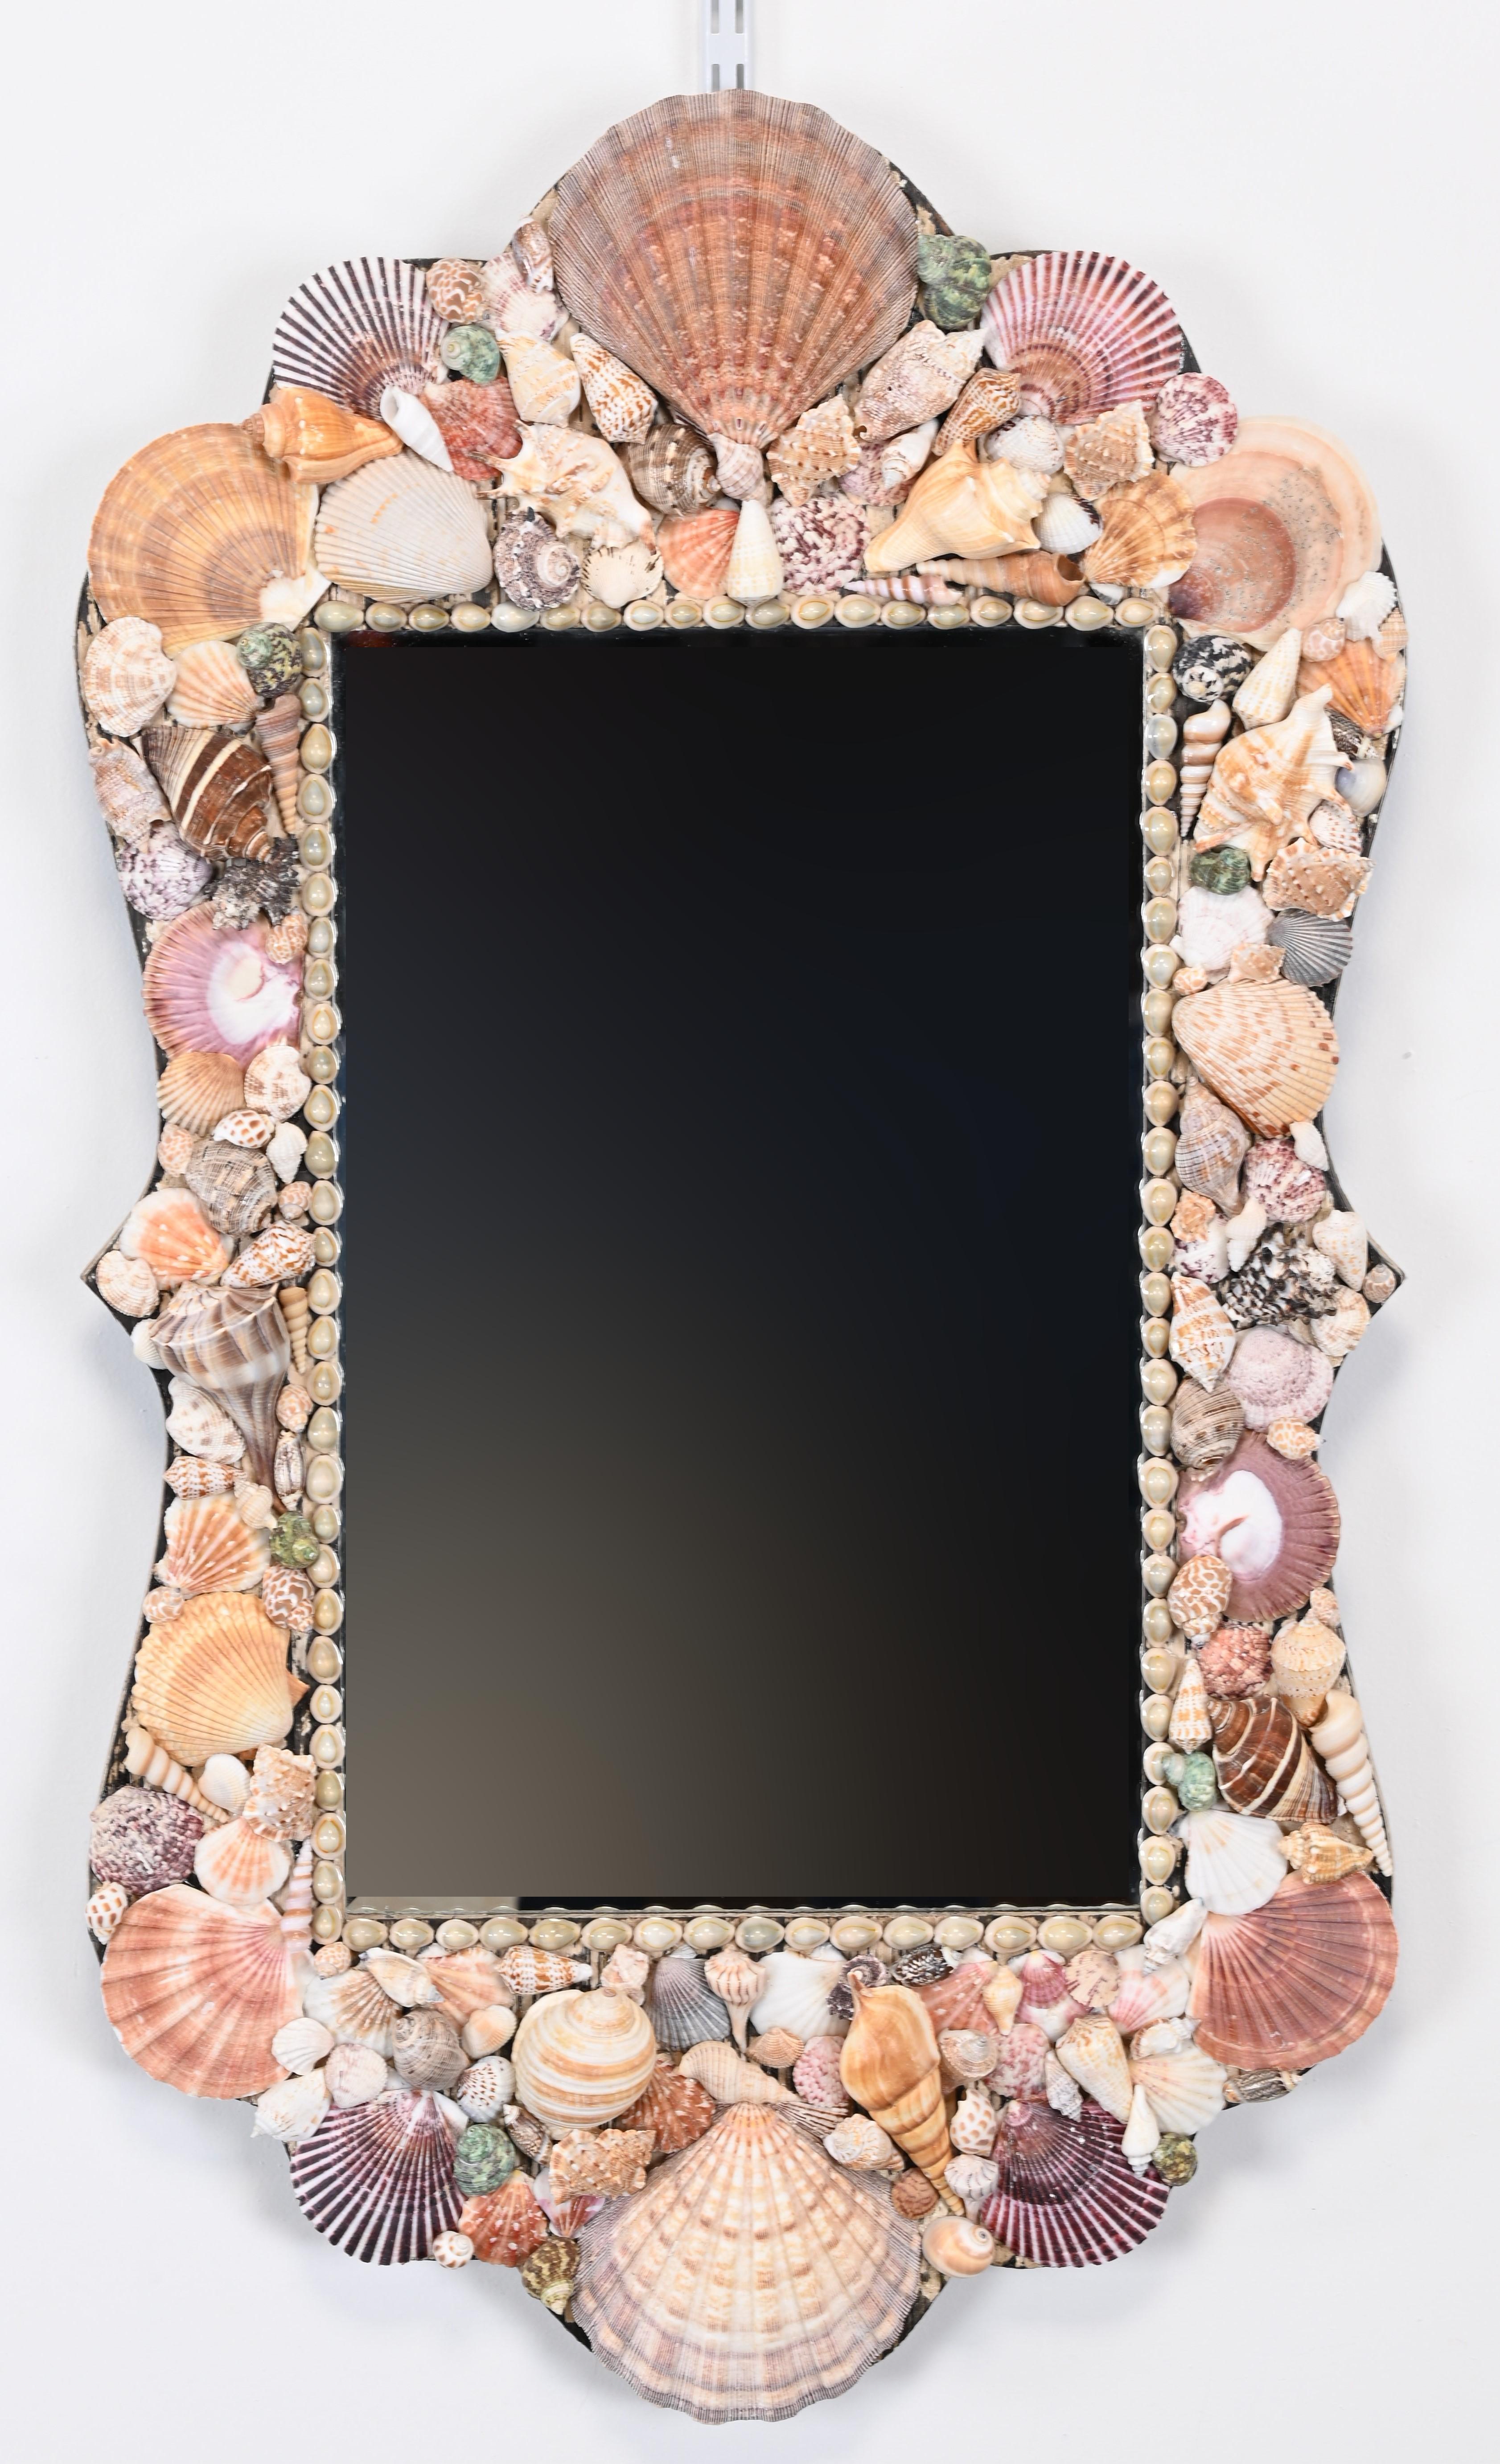 A beautiful seashell mirror in the manner of Anthony Redmile, London. This beveled glass mirror would look great in a hallway, over a mantle, in a bathroom, or powder room. Perfect for a beach house, cottage, or coastal home. Structurally sound and